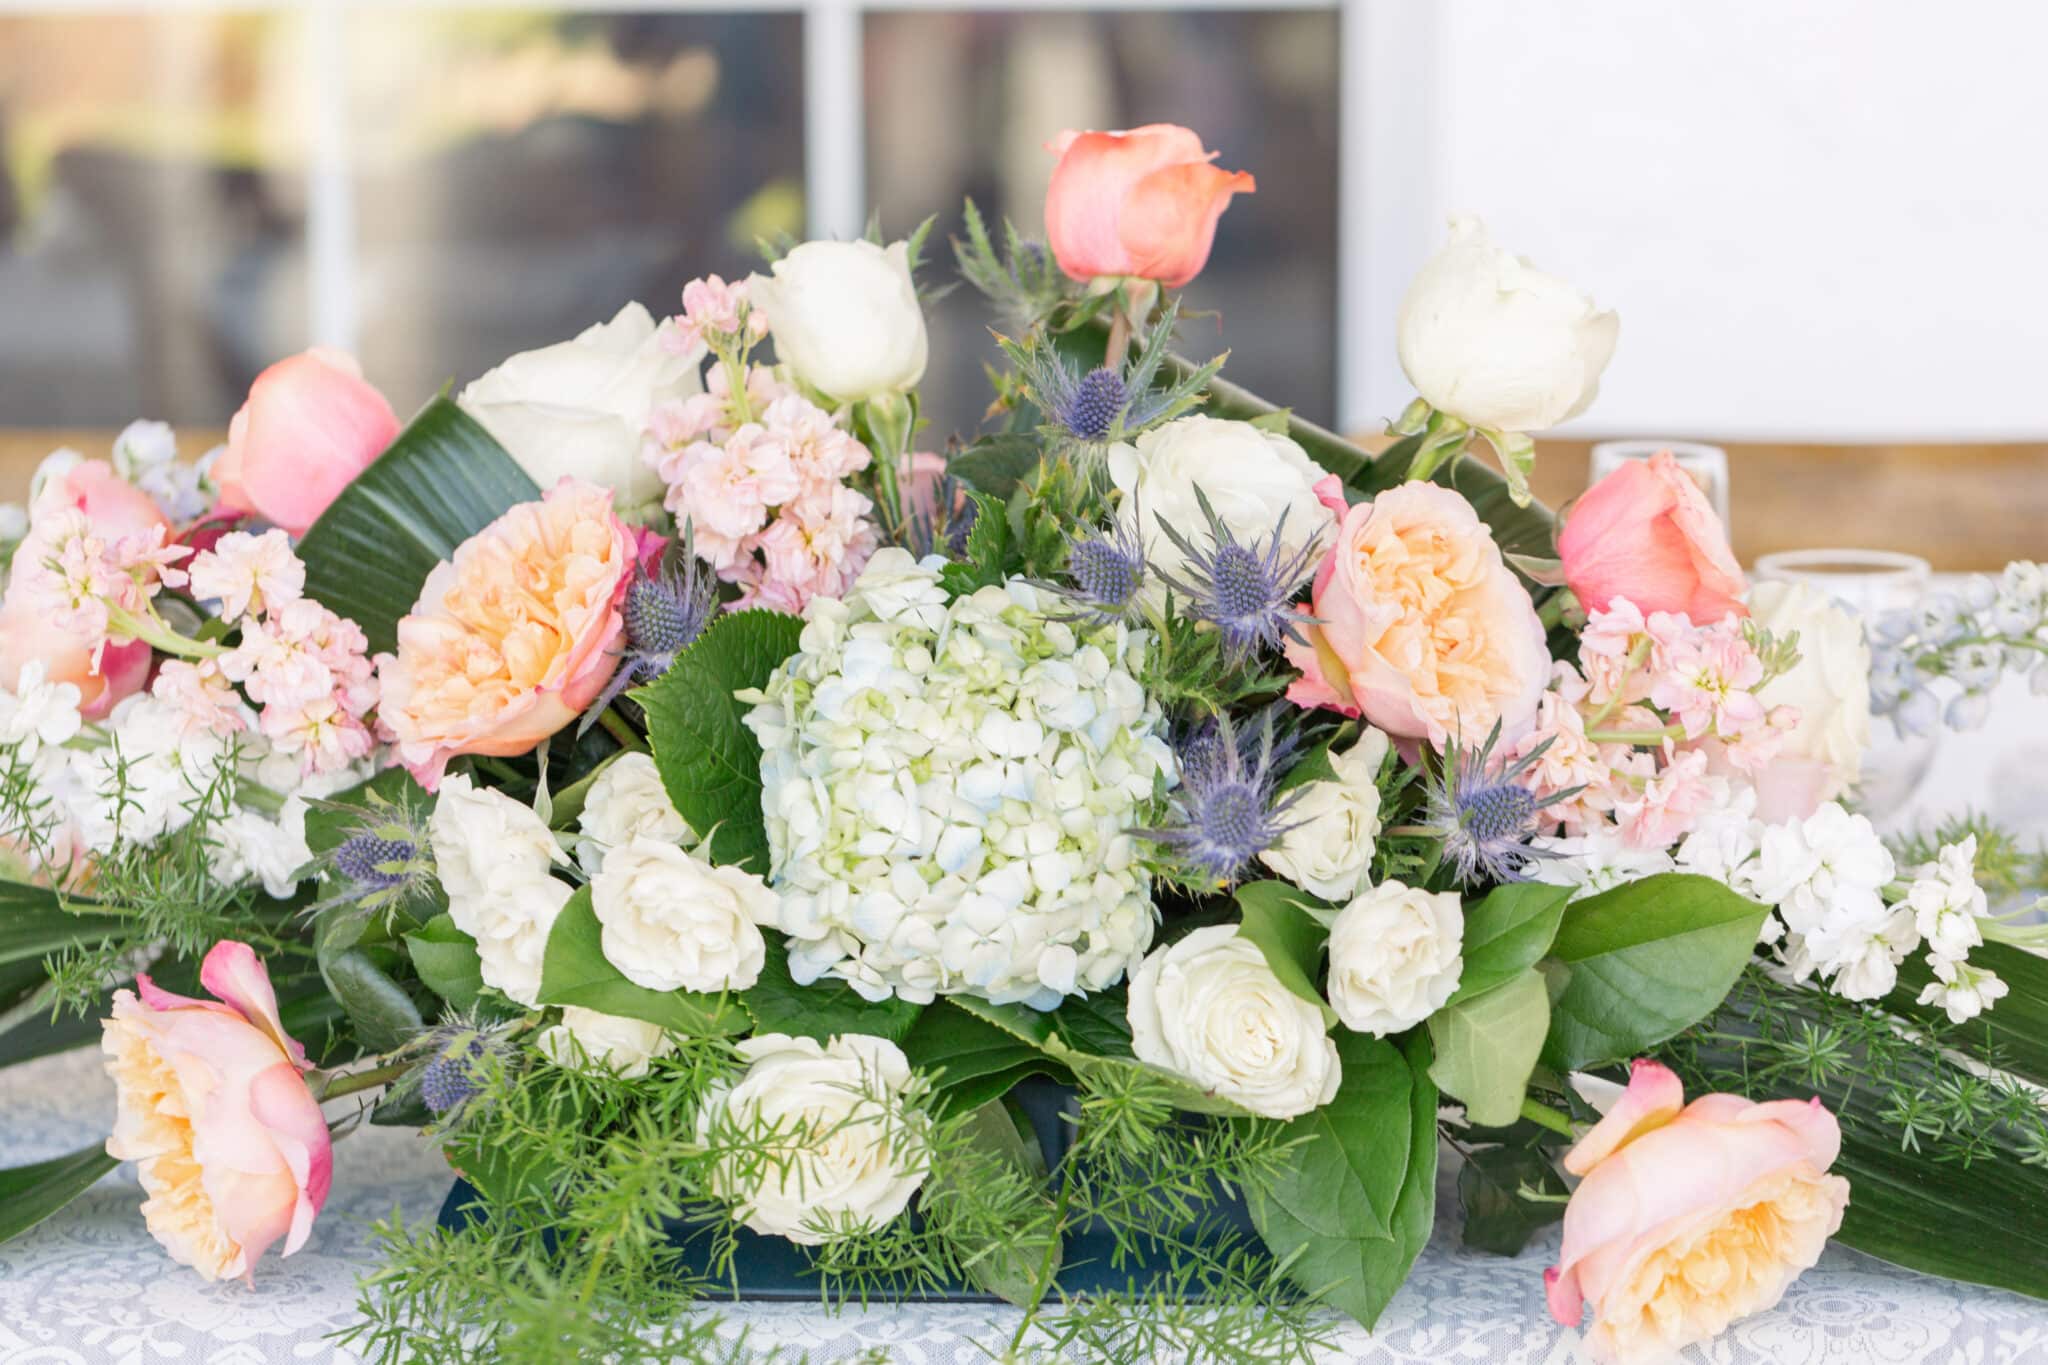 floral piece with coral colored floral and white mixed with greenery